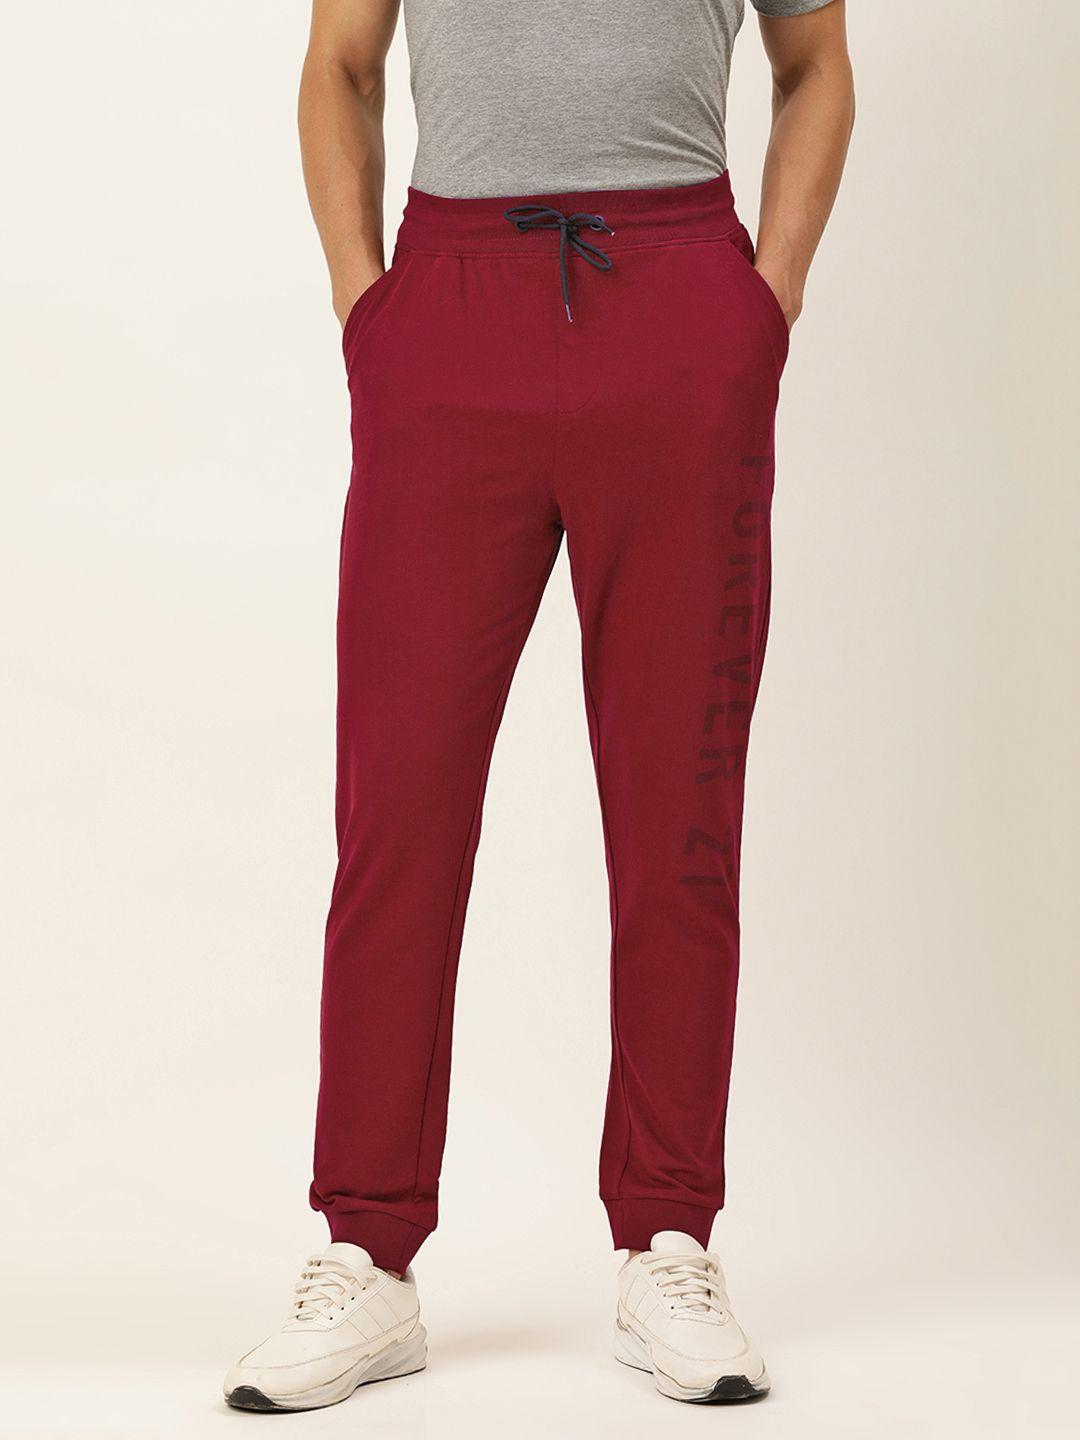 forever-21-maroon-brand-logo-printed-active-sport-joggers-track-pant